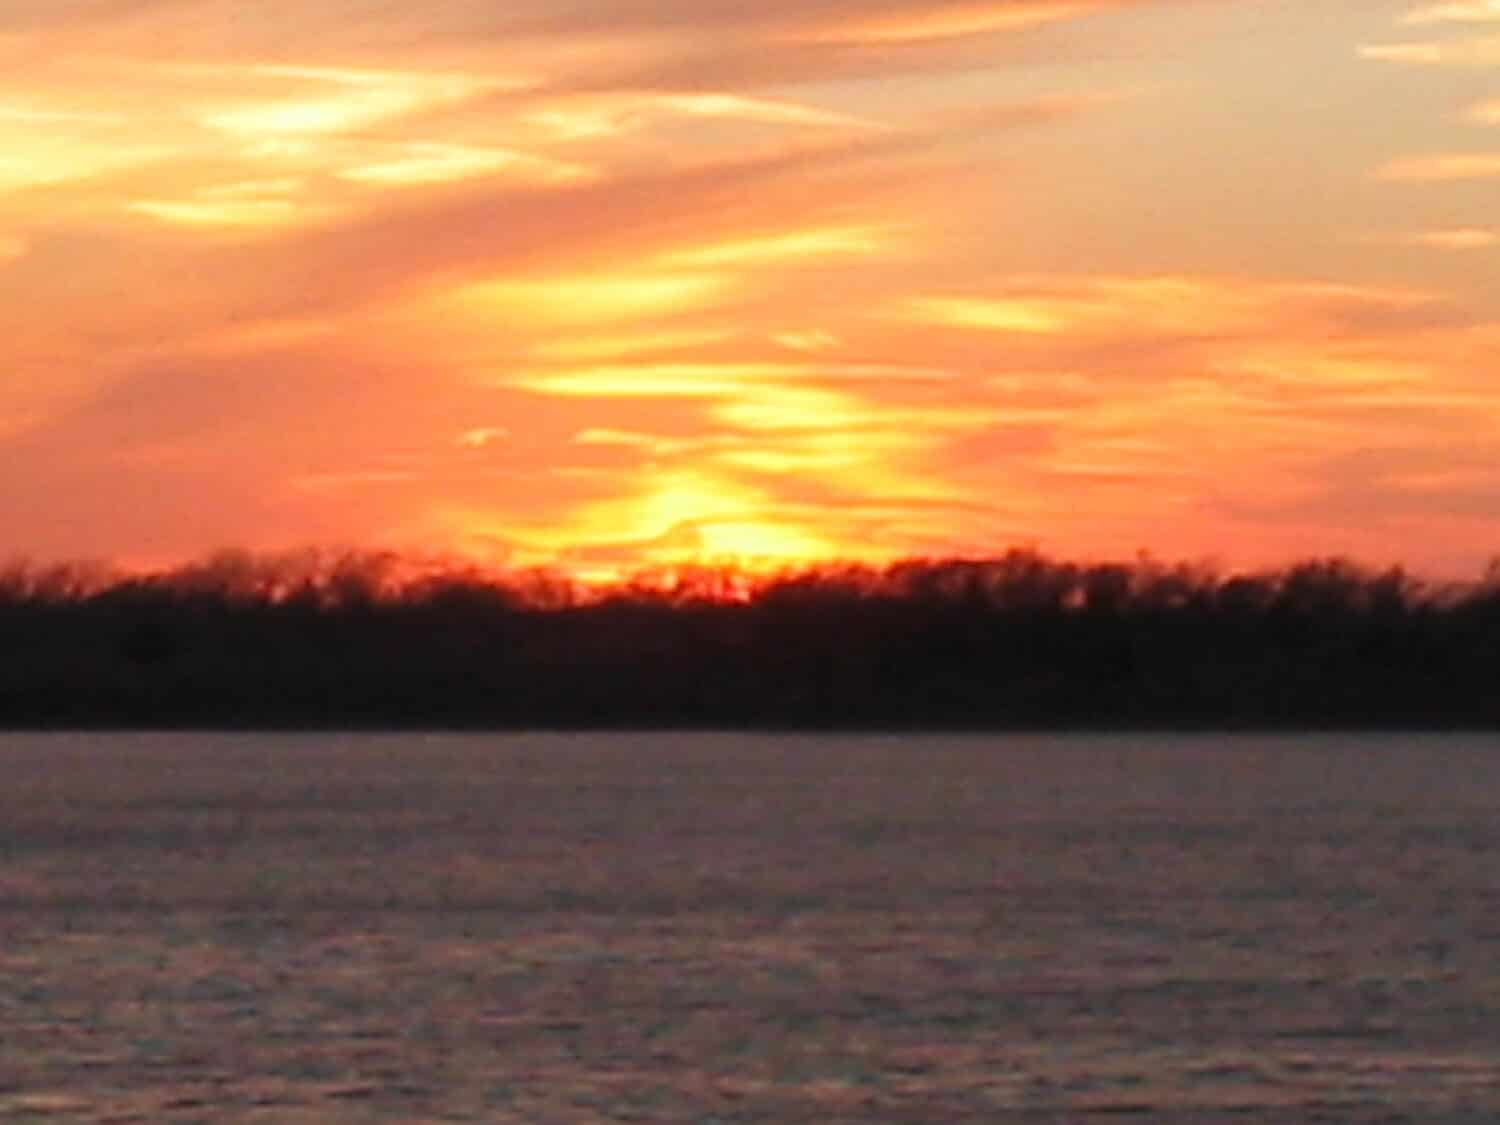 The sunset on Canton Lake in Oklahoma in March 2005.